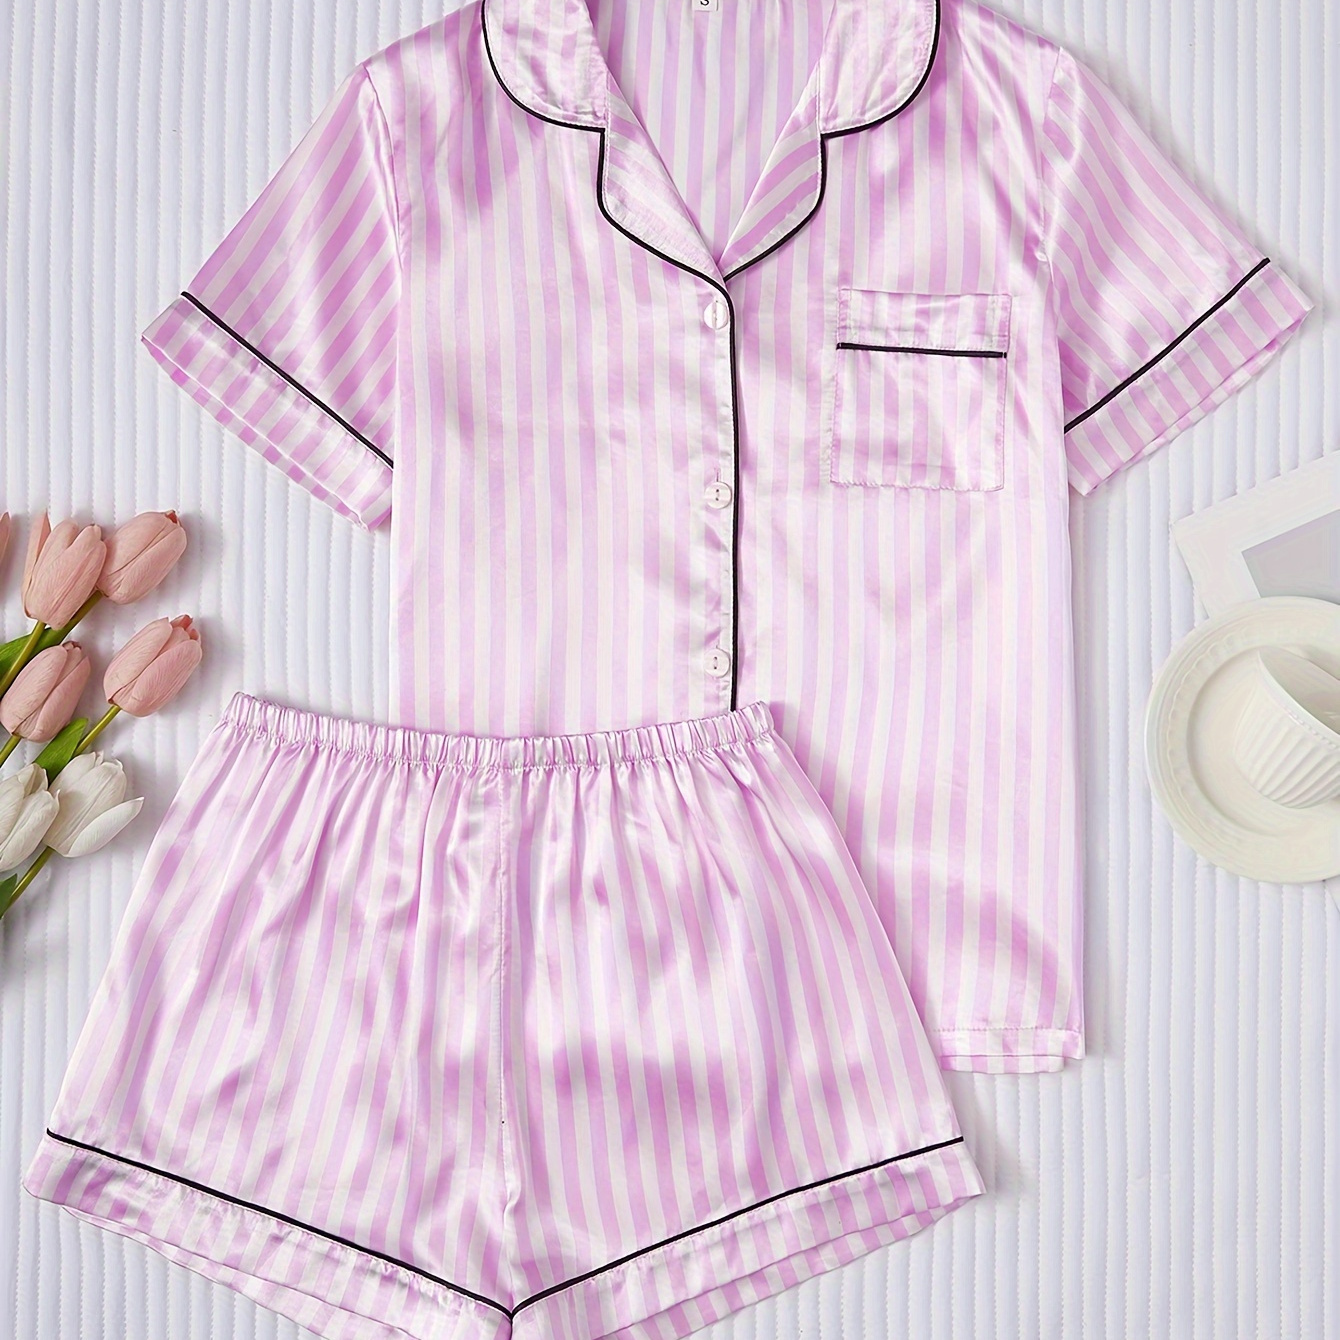 

Women's Stripe Print Satin Casual Pajama Set, Short Sleeve Buttons Lapel Top & Shorts, Comfortable Relaxed Fit